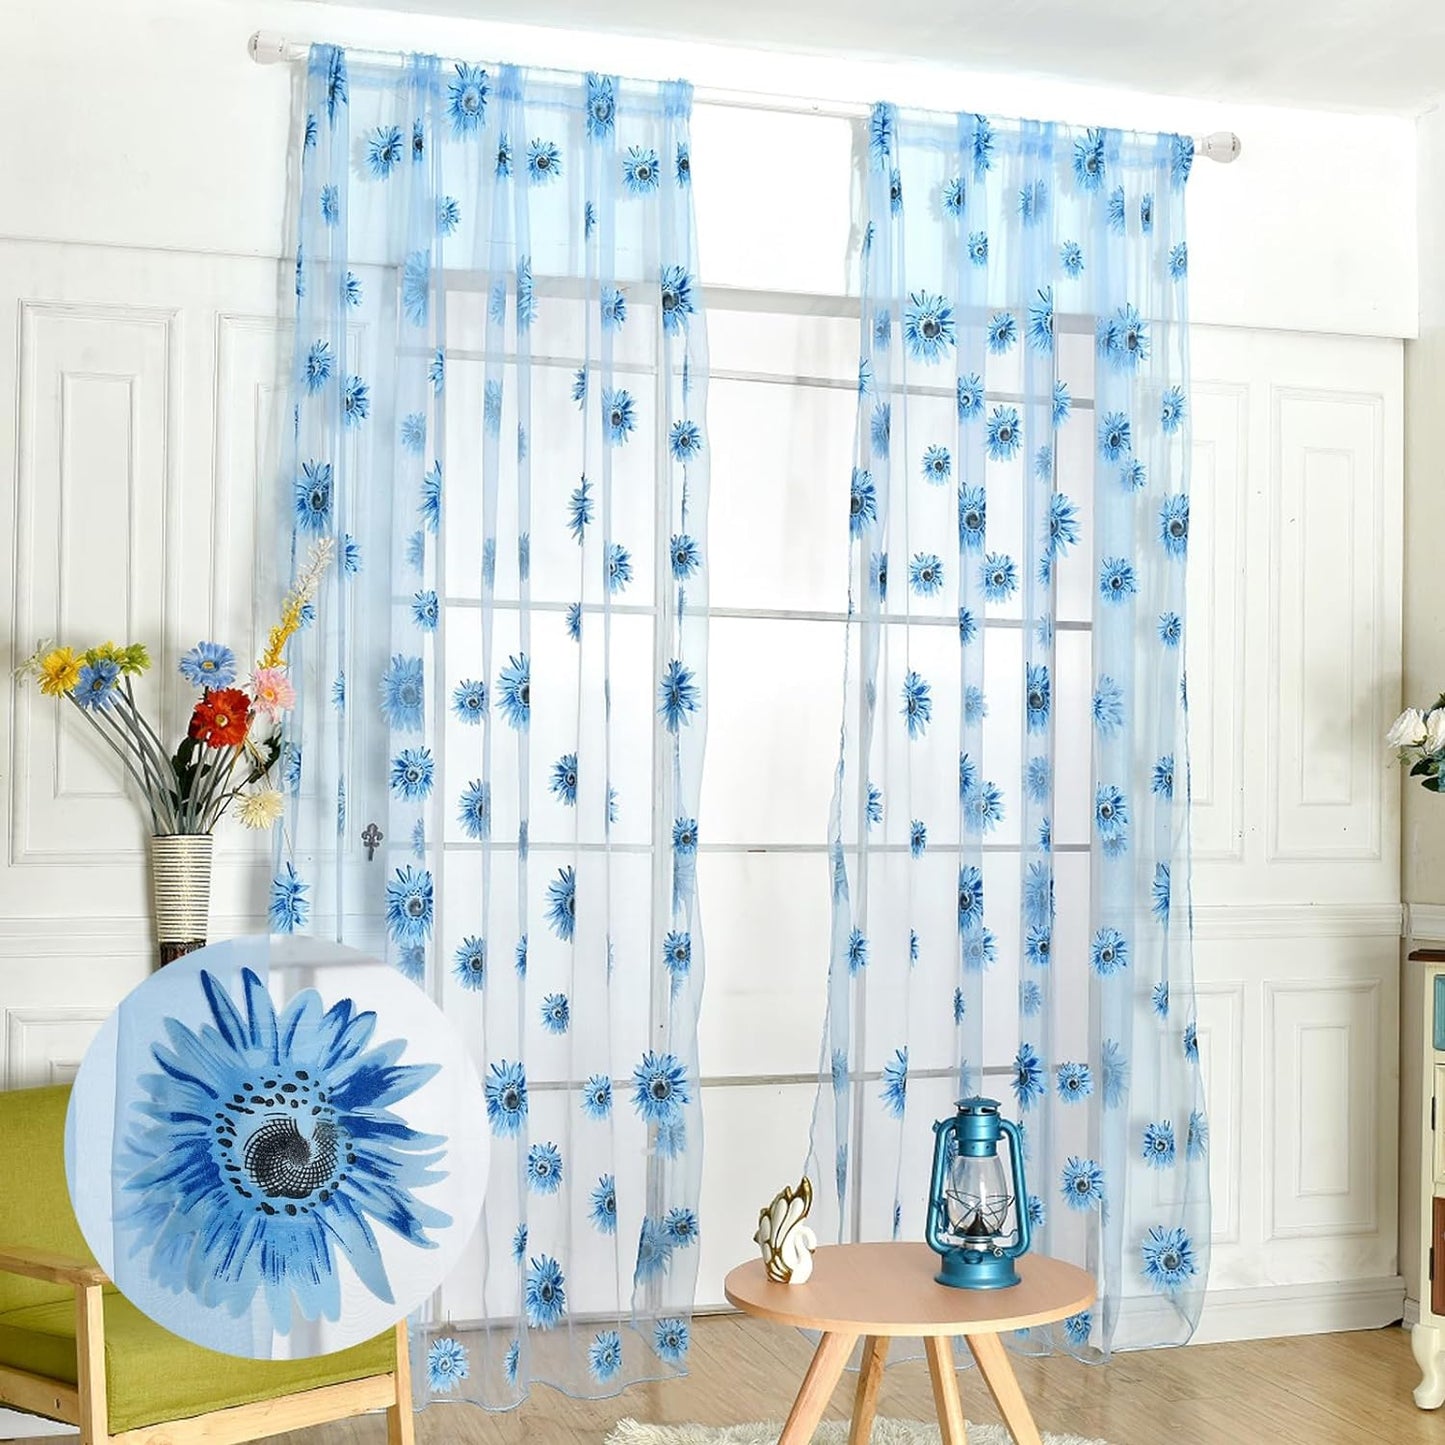 Ufurty Rely2016 Sunflower Window Curtain, 2PCS Sun Flower Floral Voile Sheer Curtain Panels Tulle Room Salix Leaf Sheer Gauze Curtain for Living Room, Bedroom, Balcony - Rod Pocket Top (100 X 200)  Rely2016 Blue Flower 100*200Cm 